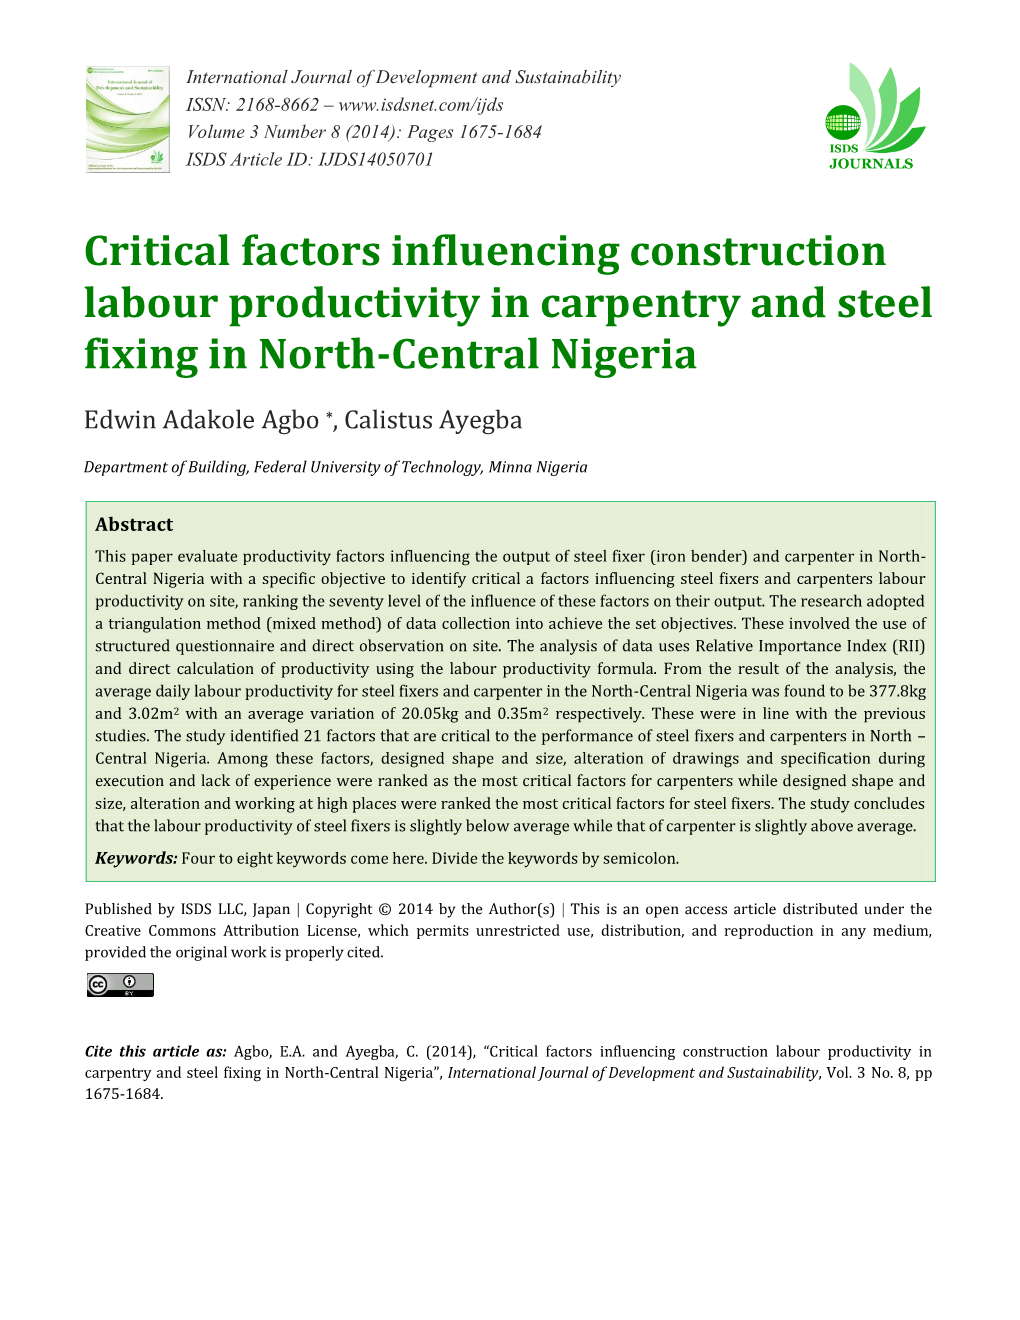 Critical Factors Influencing Construction Labour Productivity in Carpentry and Steel Fixing in North-Central Nigeria